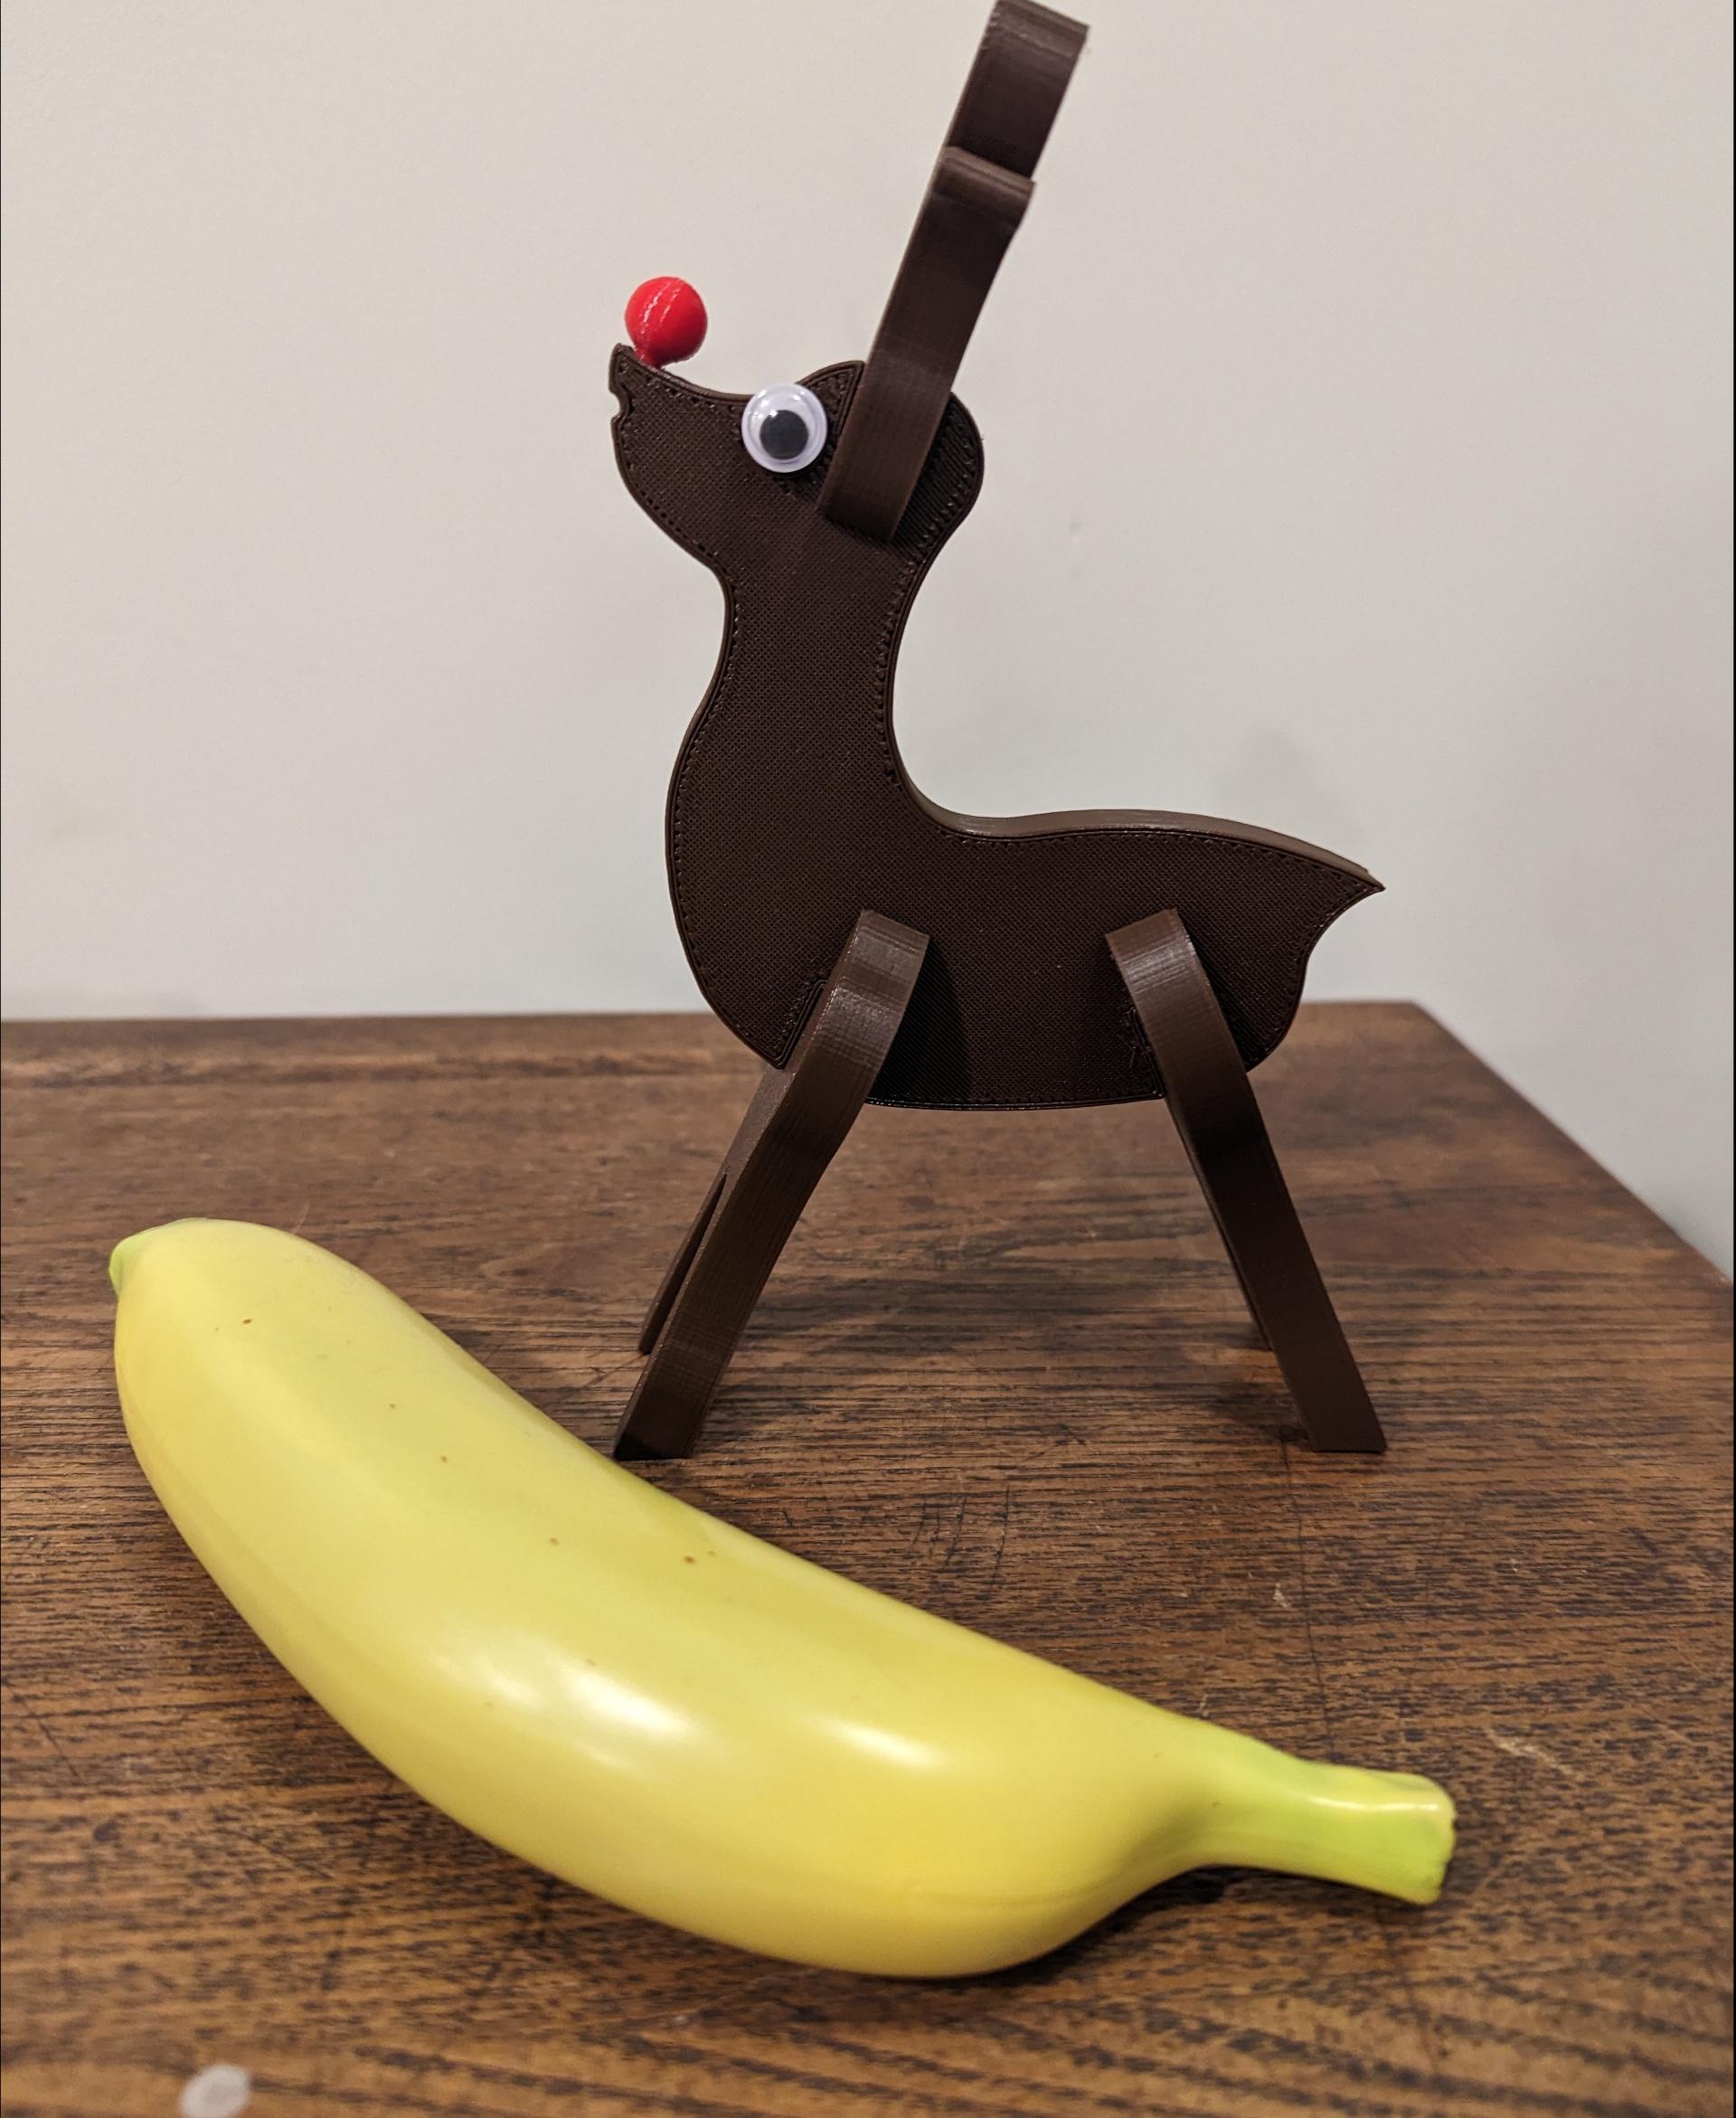 Reindeer Wood Cut Kit - @PrintedSolid Tree Brown
@GizmoDorks White
@prusament Lipstick Red

and googly eyes - 3d model